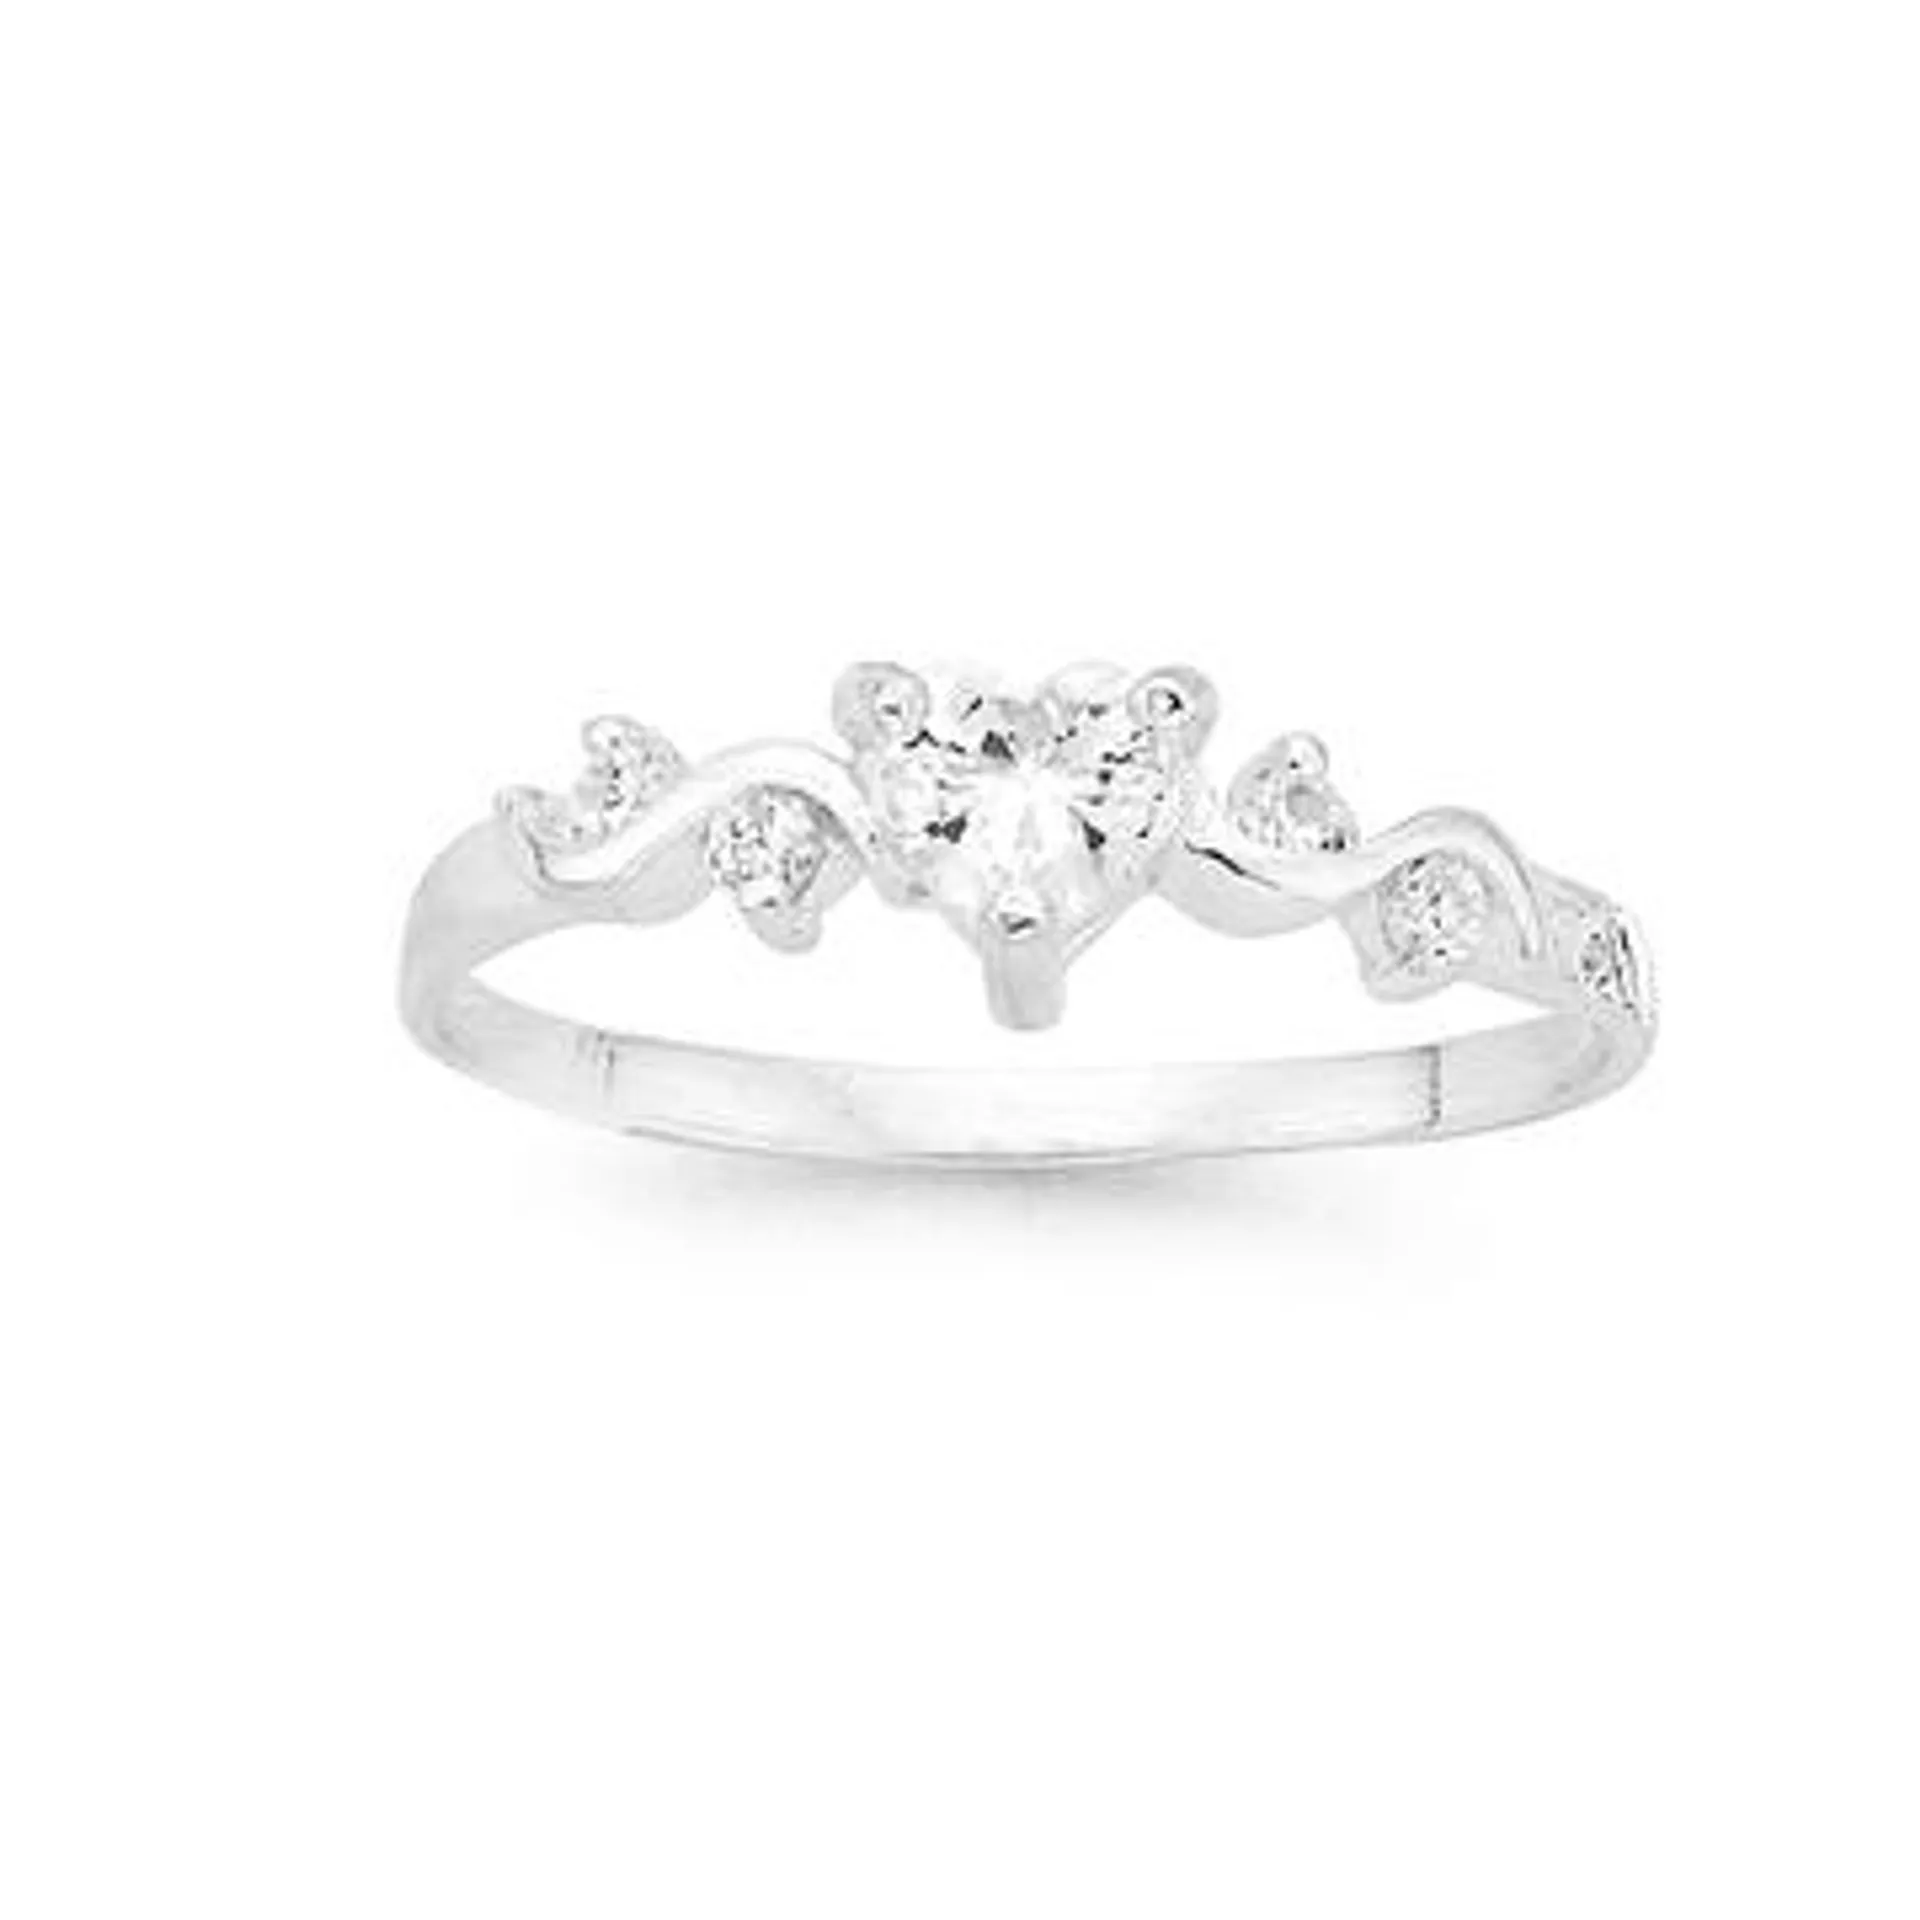 Sterling Silver Cubic Zirconia Heart Ring